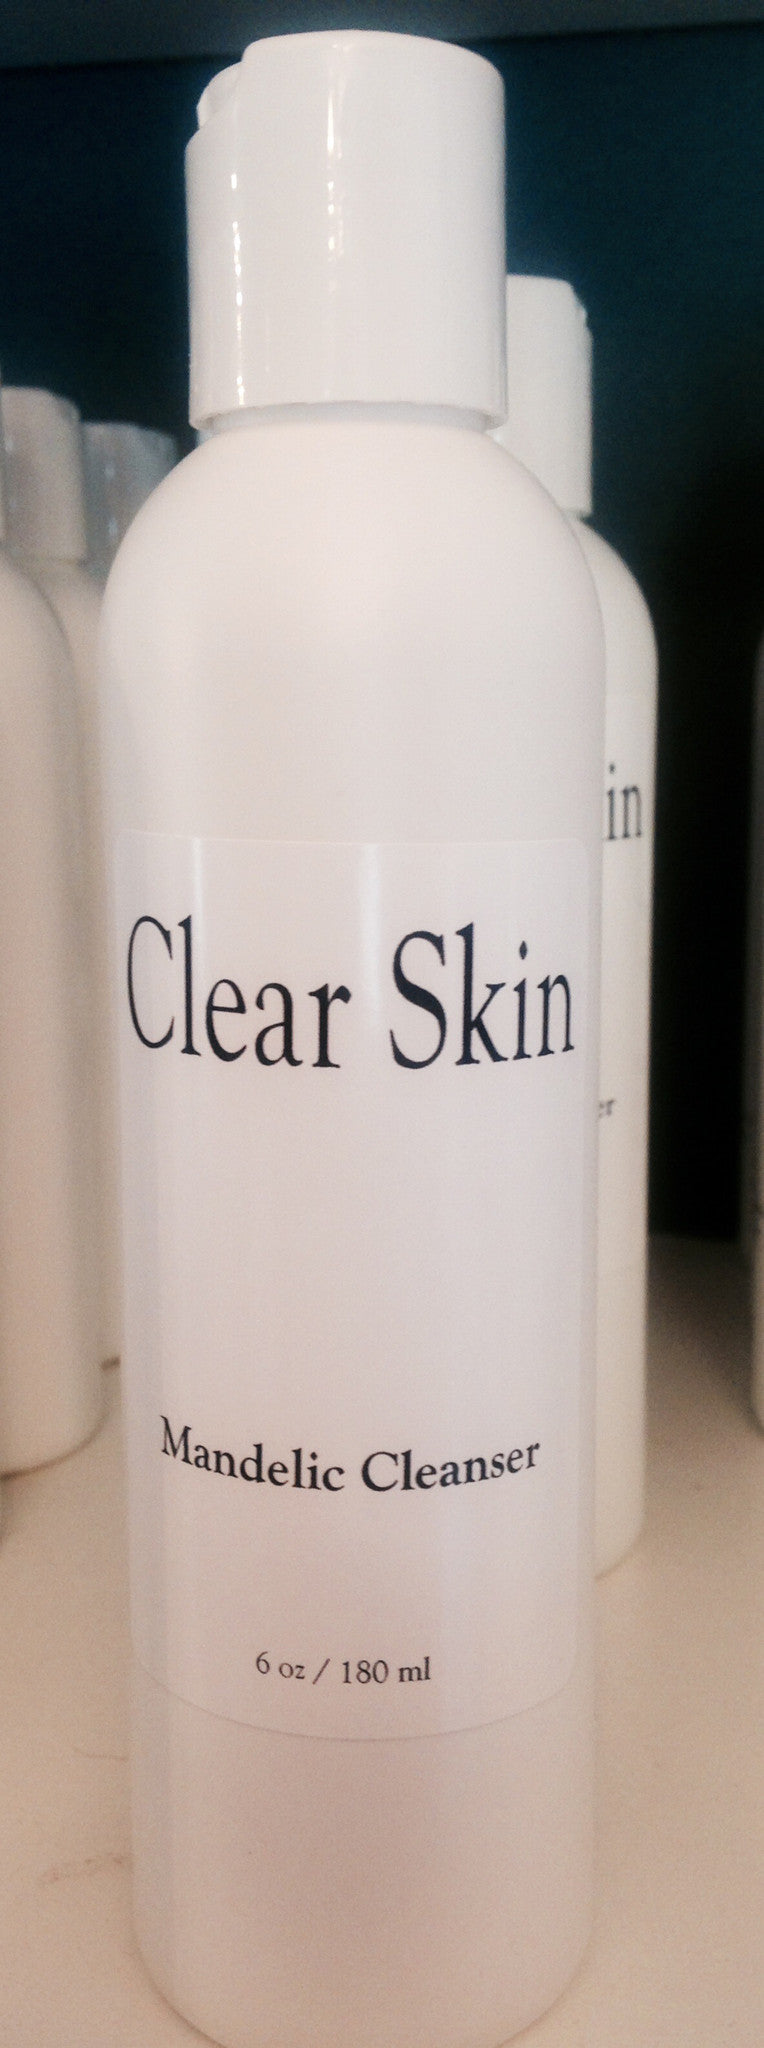 ClearSkin Mandelic Cleanser 6oz - Mary Turner Day Spa & Boutique